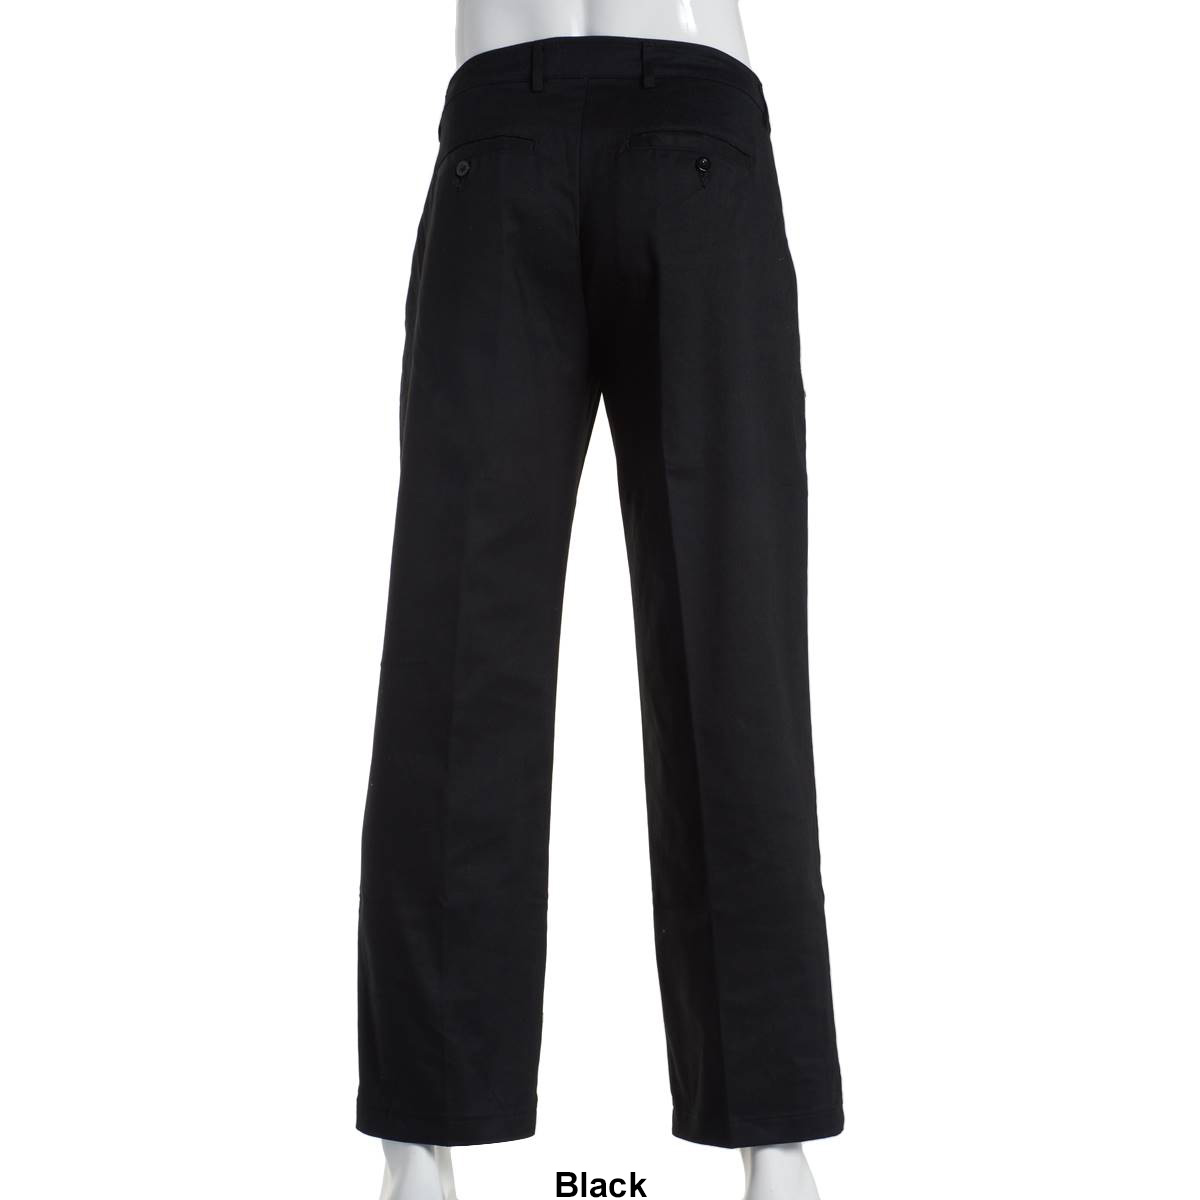 Mens Architect(R) Wrinkle Resistant Classic Pleated Pants